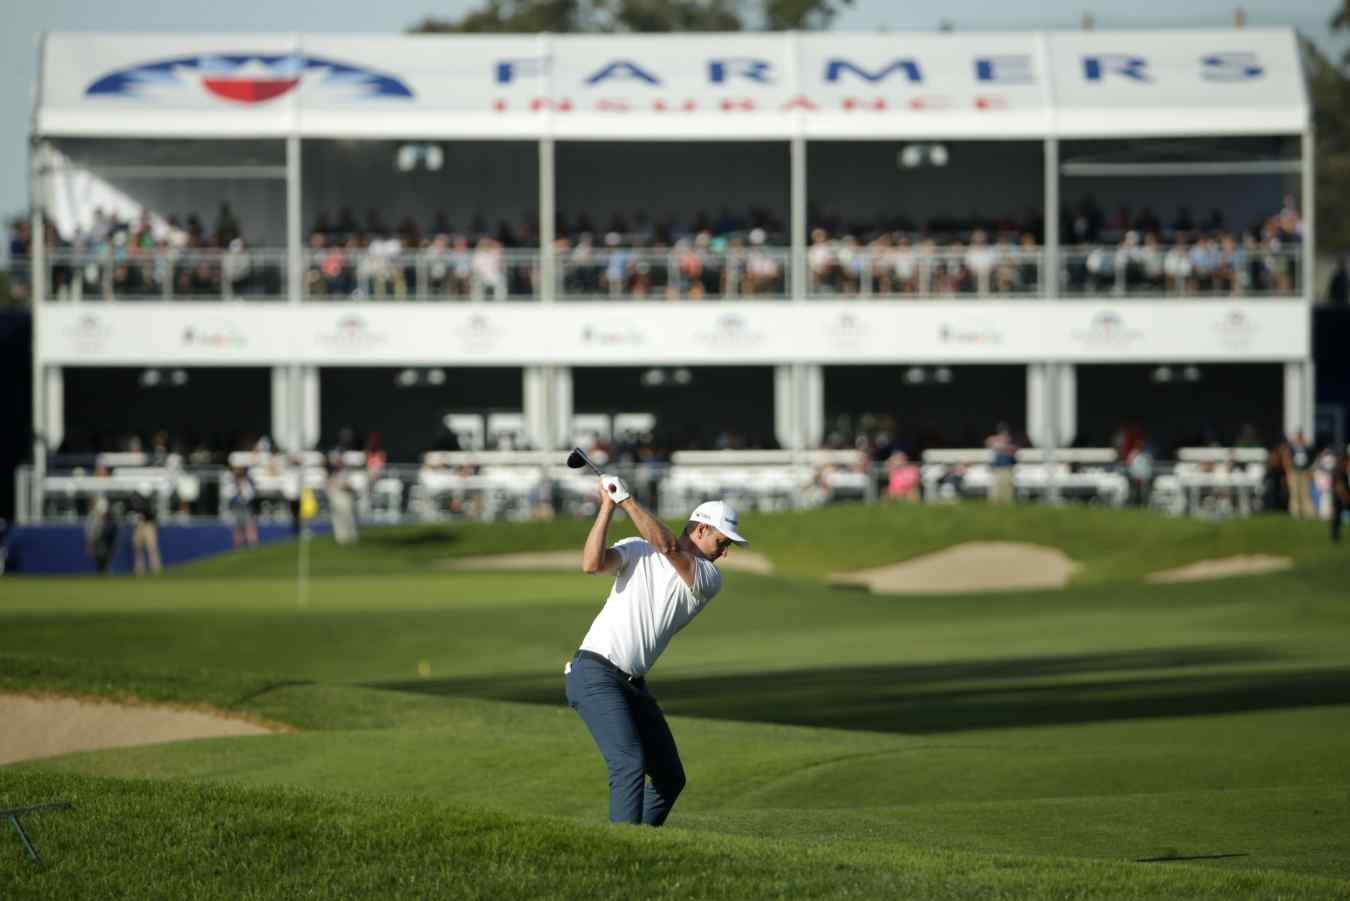 Farmers Insurance Open Purse How Much Does the Winner Make?